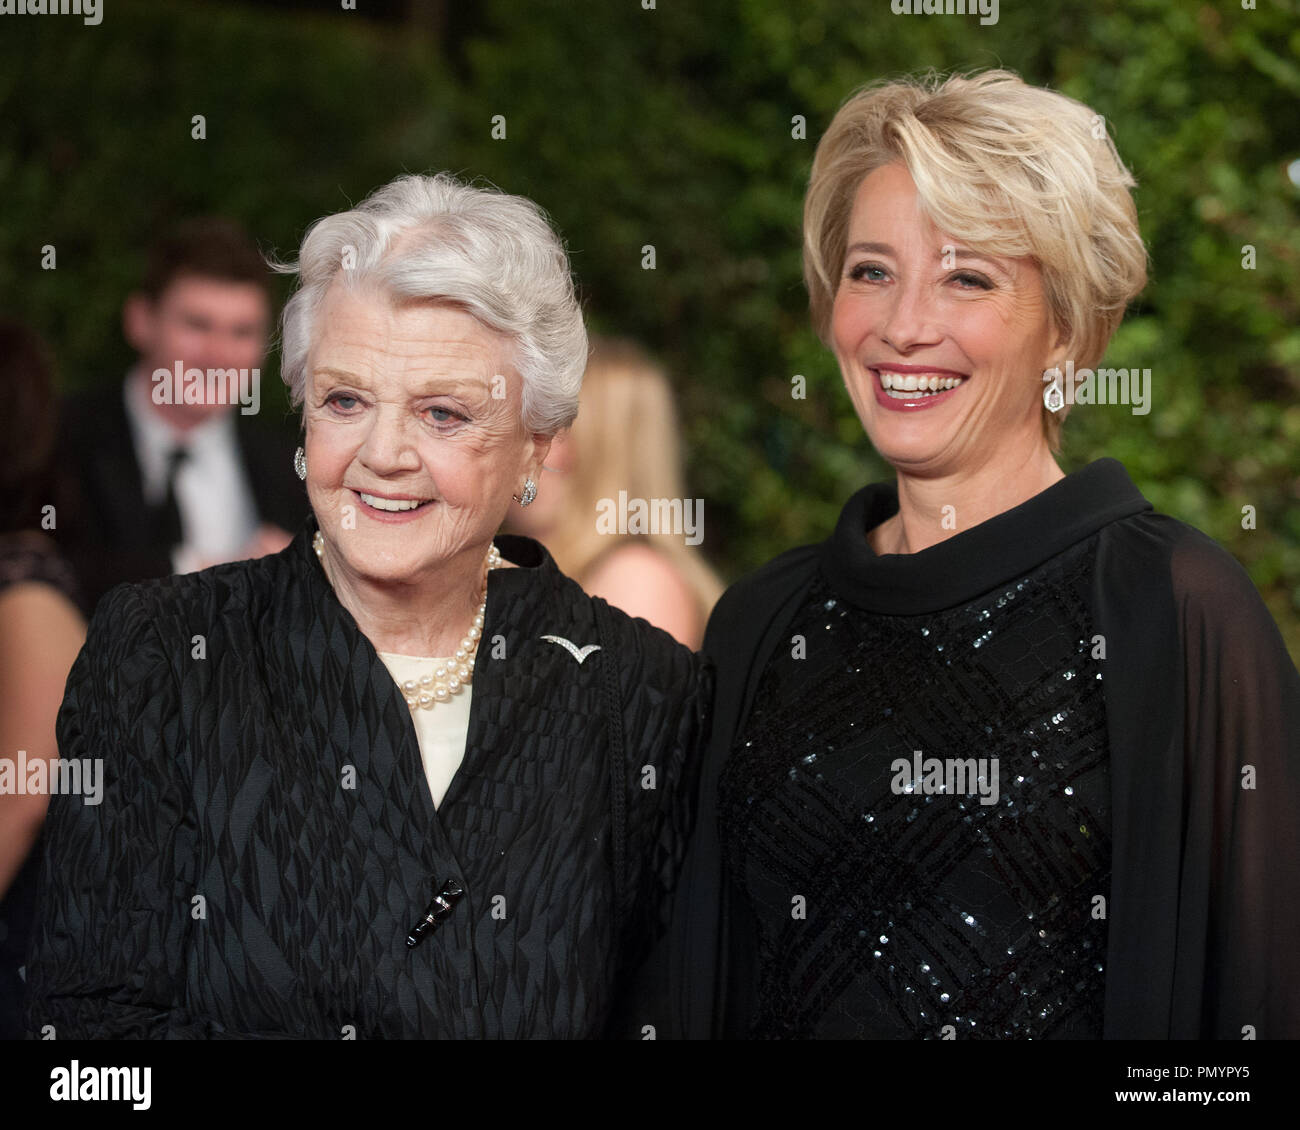 Honorary Award recipient Angela Lansbury  (left) and actress Emma Thompson attend the 5th Annual Governors Awards at The Ray Dolby Ballroom at Hollywood & Highland Center® in Hollywood, CA, on Saturday, November 16, 2013.  File Reference # 32184 031  For Editorial Use Only -  All Rights Reserved Stock Photo